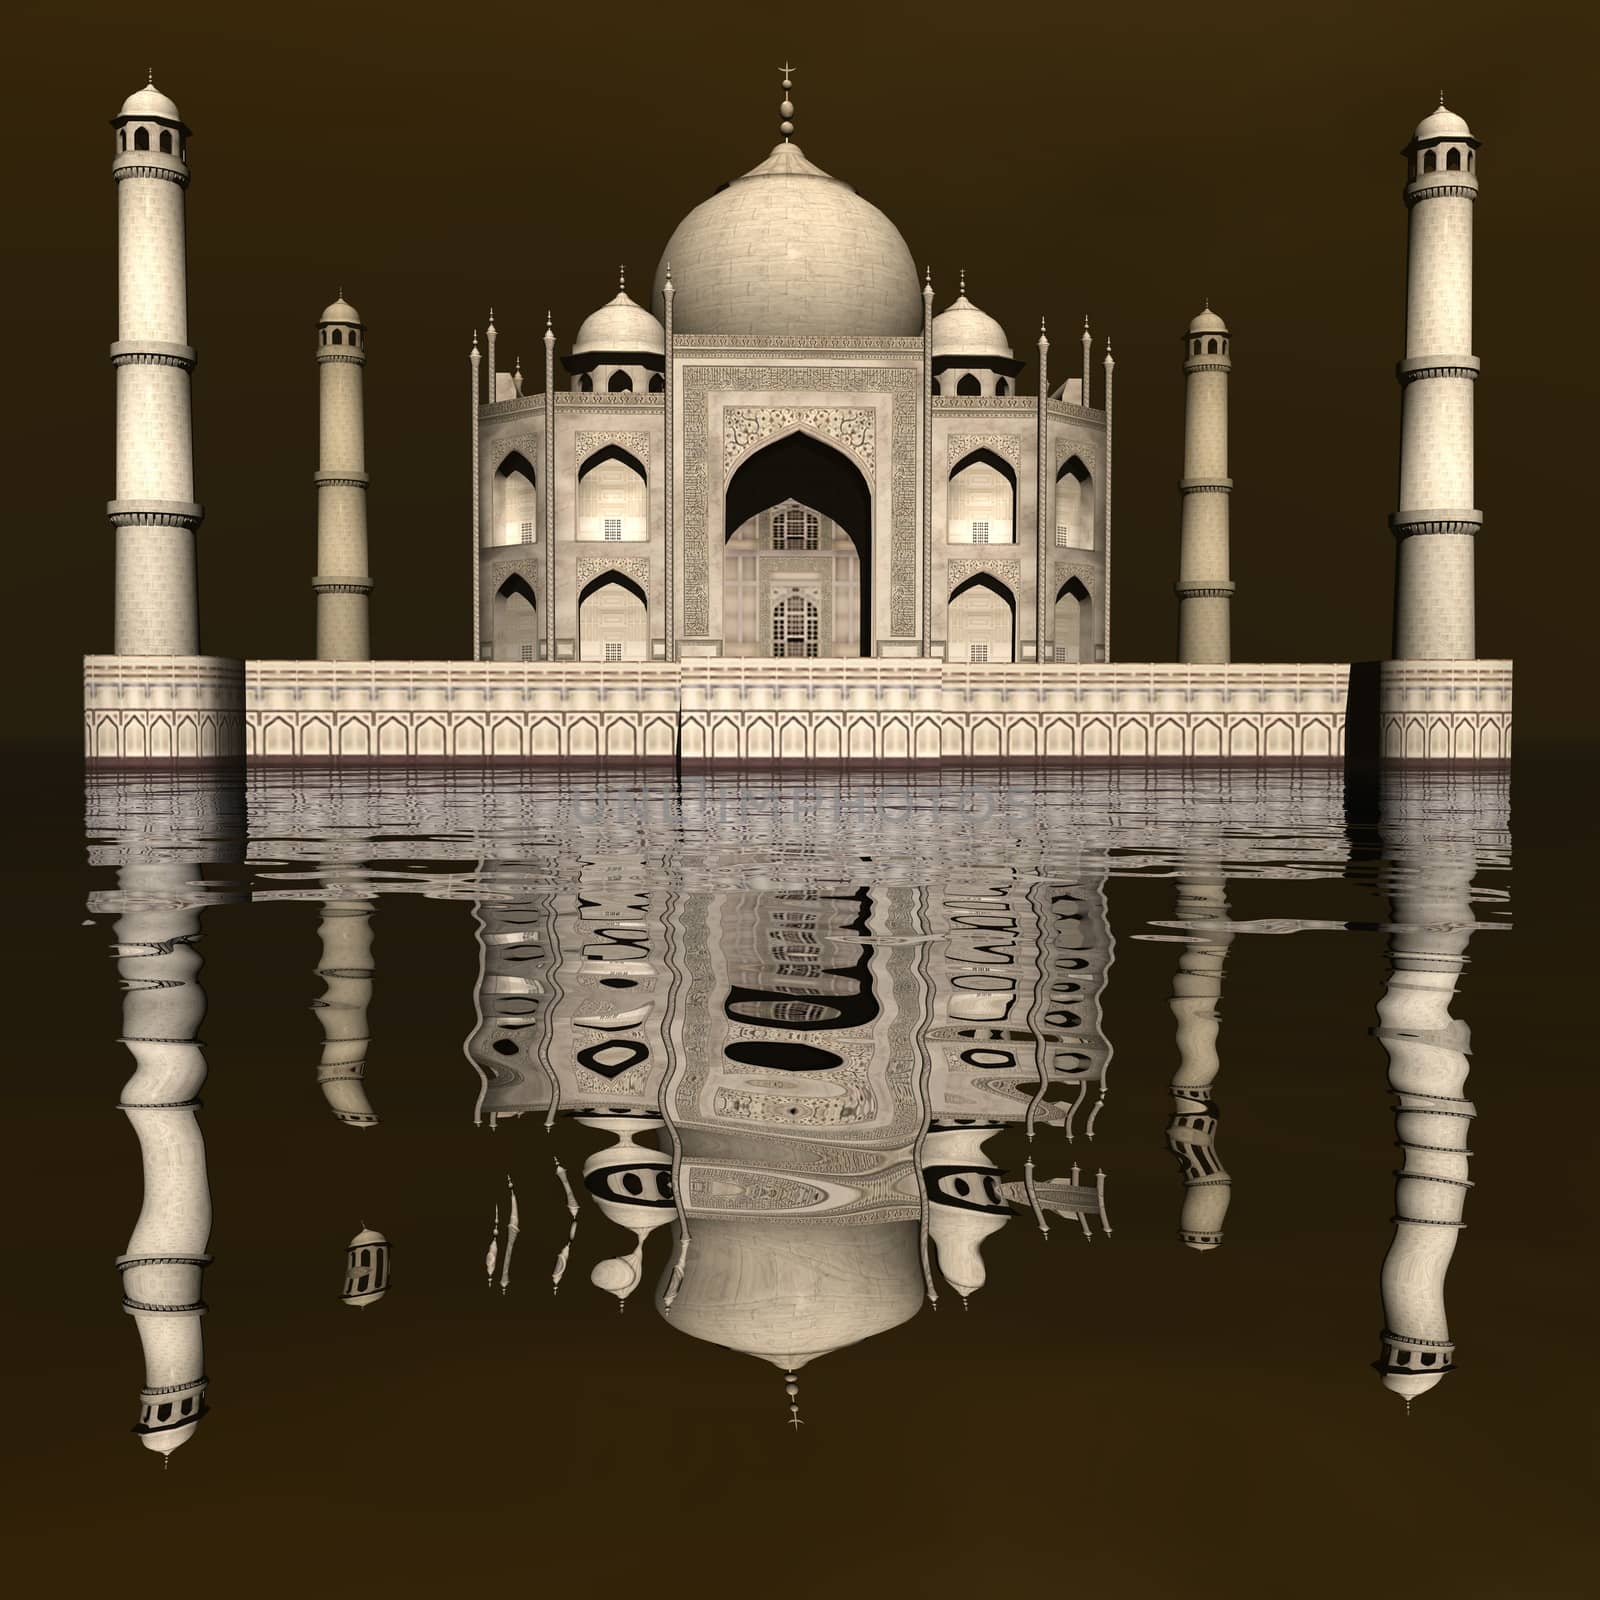 Famous Taj Mahal mausoleum and its mirror reflection by day, Agra, India